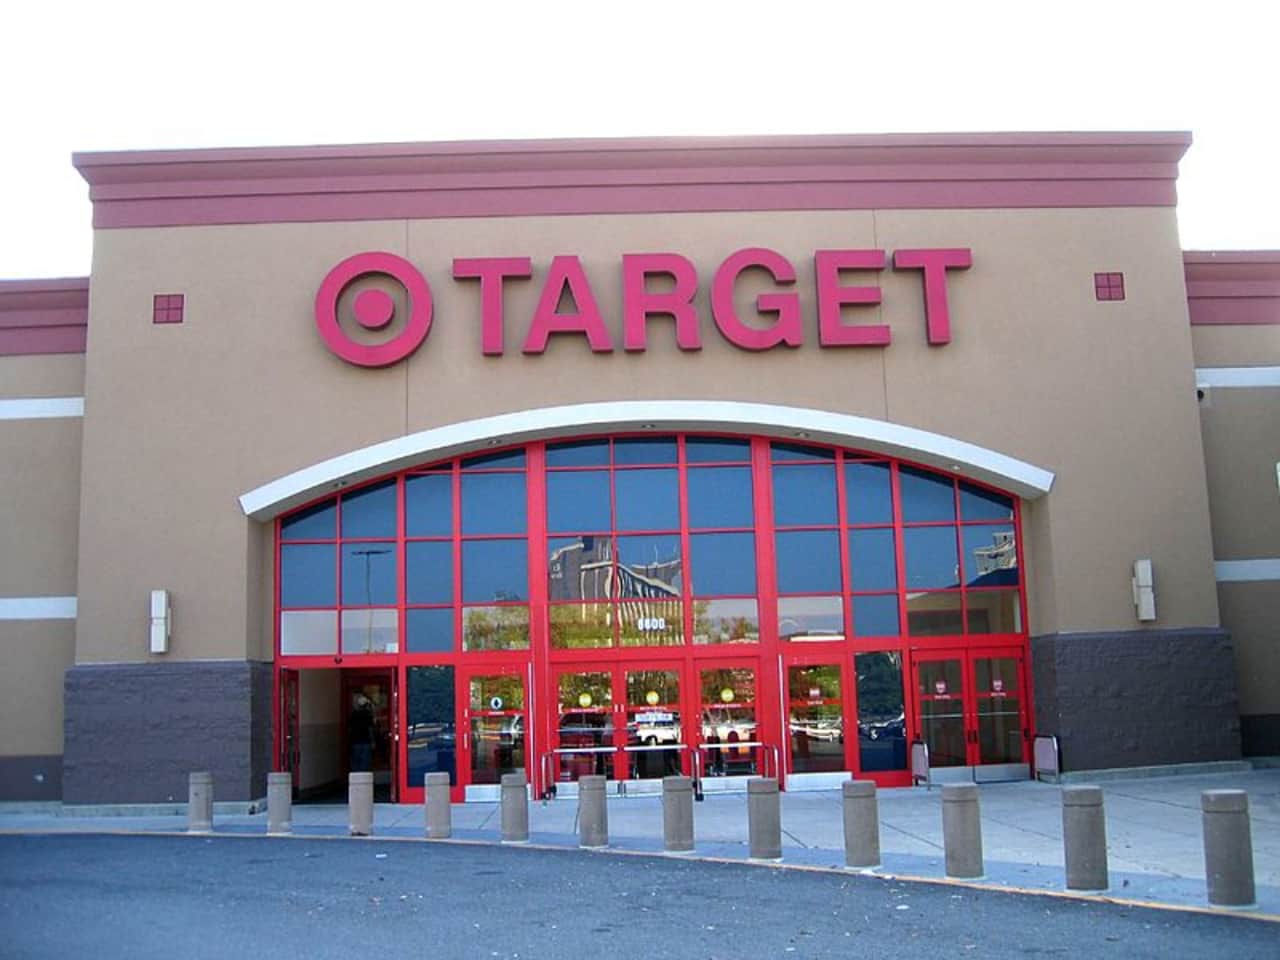 A Bridgeport man was arrested by Trumbull Police for stealing a vacuum cleaner from the Target at the Westfield Trumbull Mall.